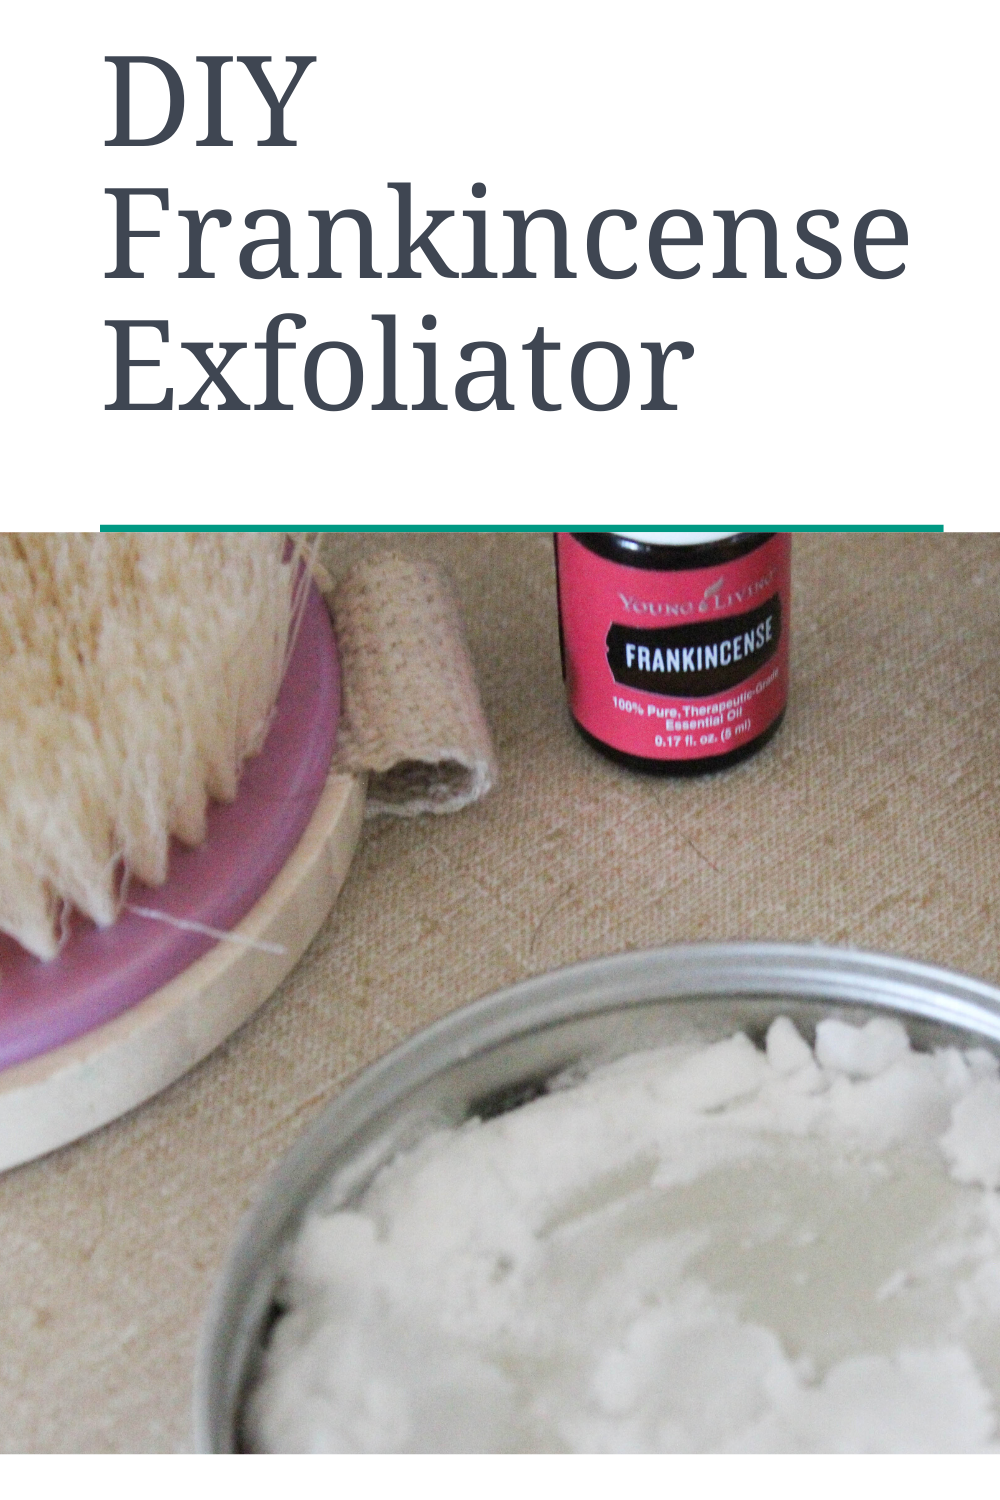 Need glowing skin, stat? Mix up a batch of my frankincense exfoliator! It uses all-natural ingredients and it smells amazing. 